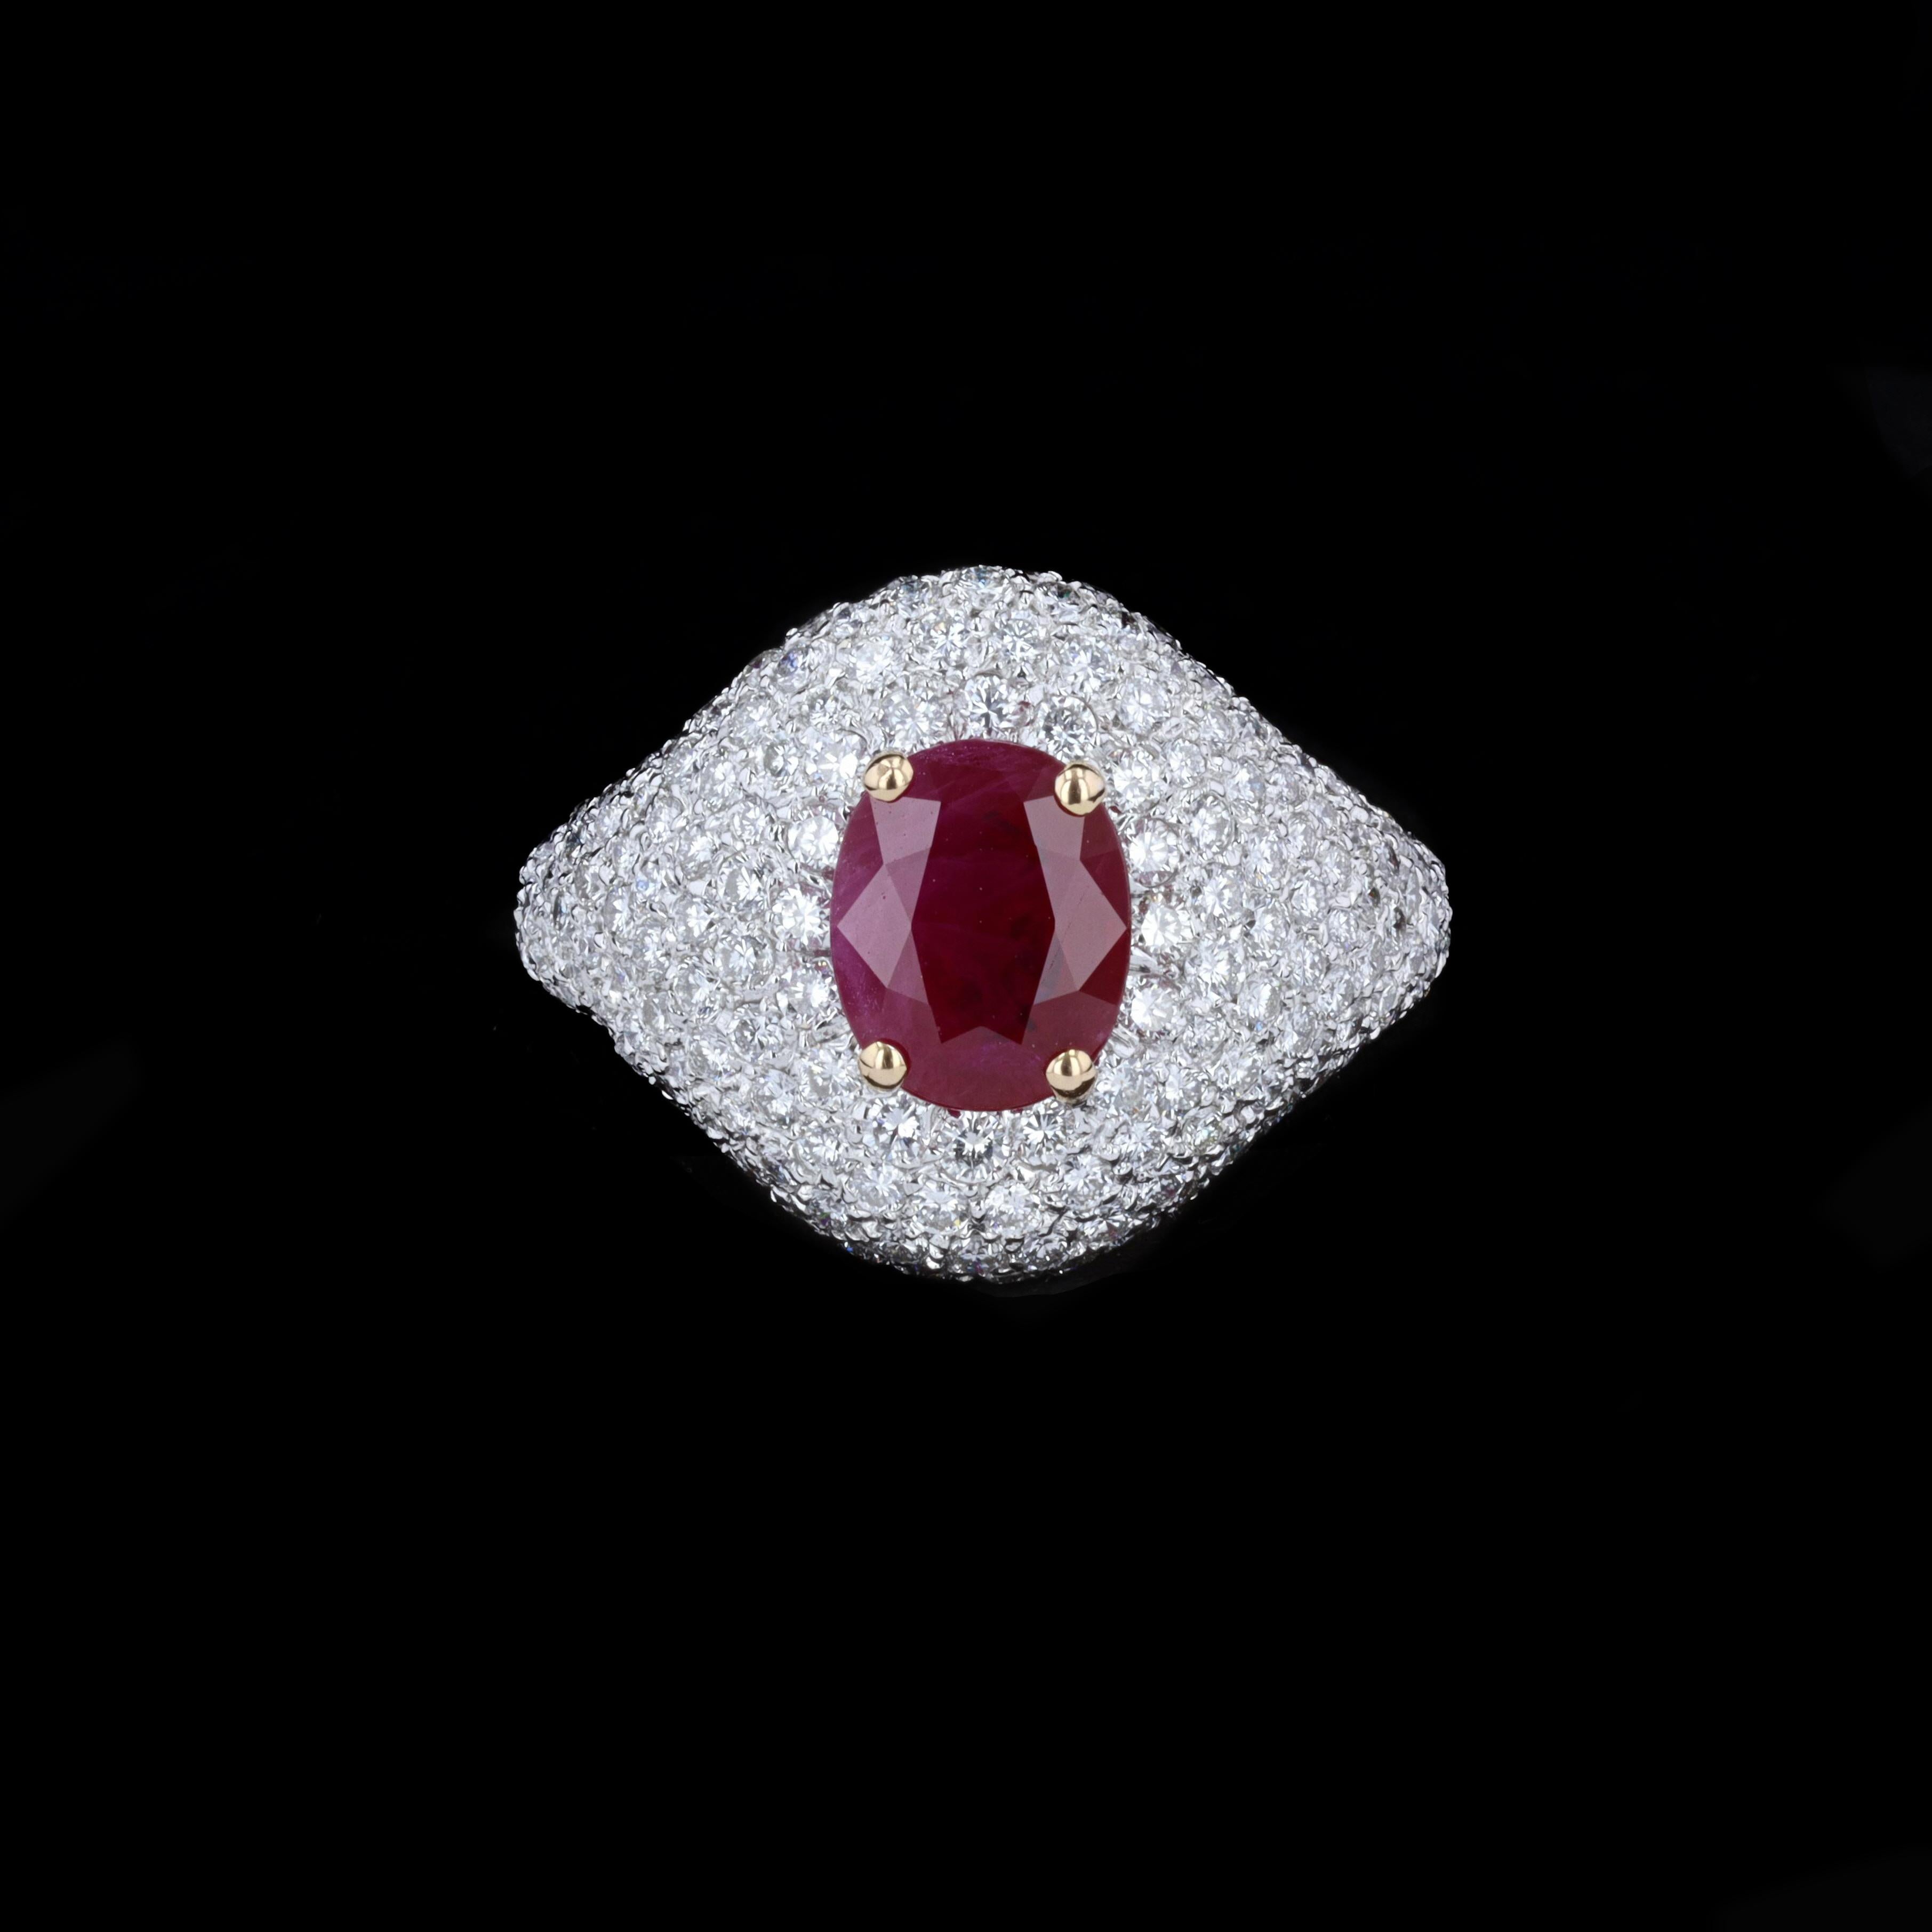 An estate ruby and diamond ring crafted in 14k white and yellow gold. In the center is an oval-cut ruby of approximately 2.48 carats, framed in yellow gold prongs. Surrounding the center stone are nearly 250 round brilliant diamonds, set pave style